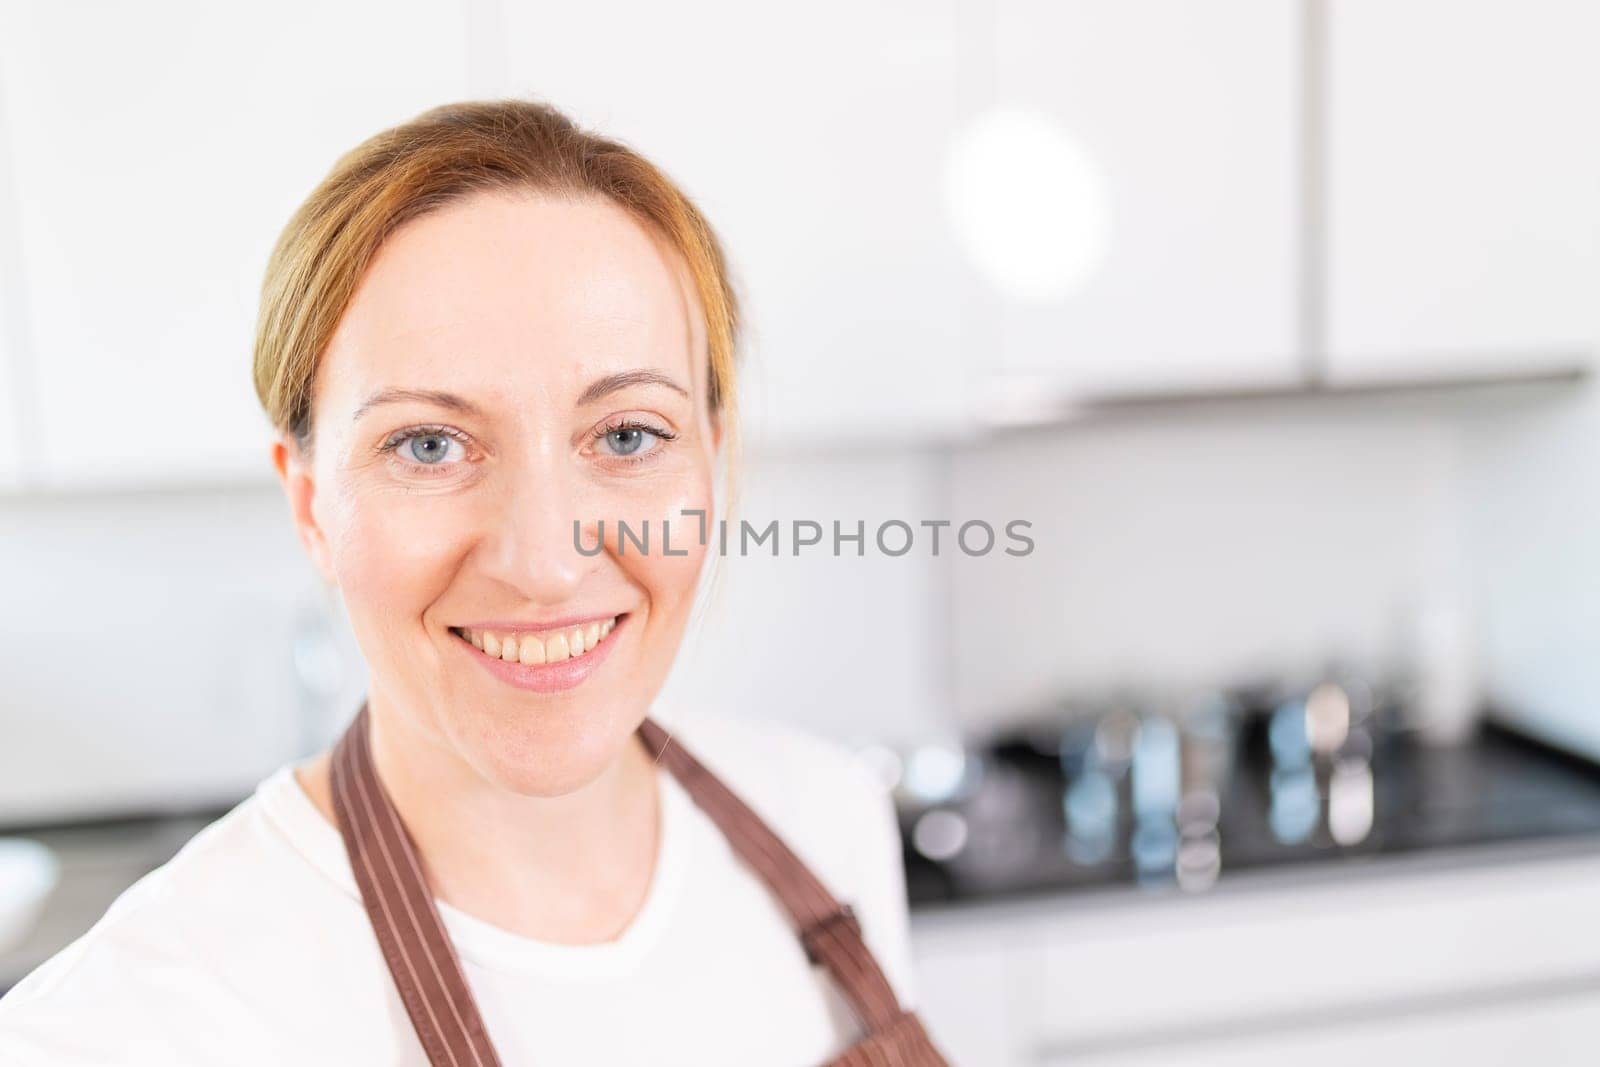 A woman with blonde hair and blue eyes is smiling in front of a kitchen counter. She is wearing an apron and a white shirt